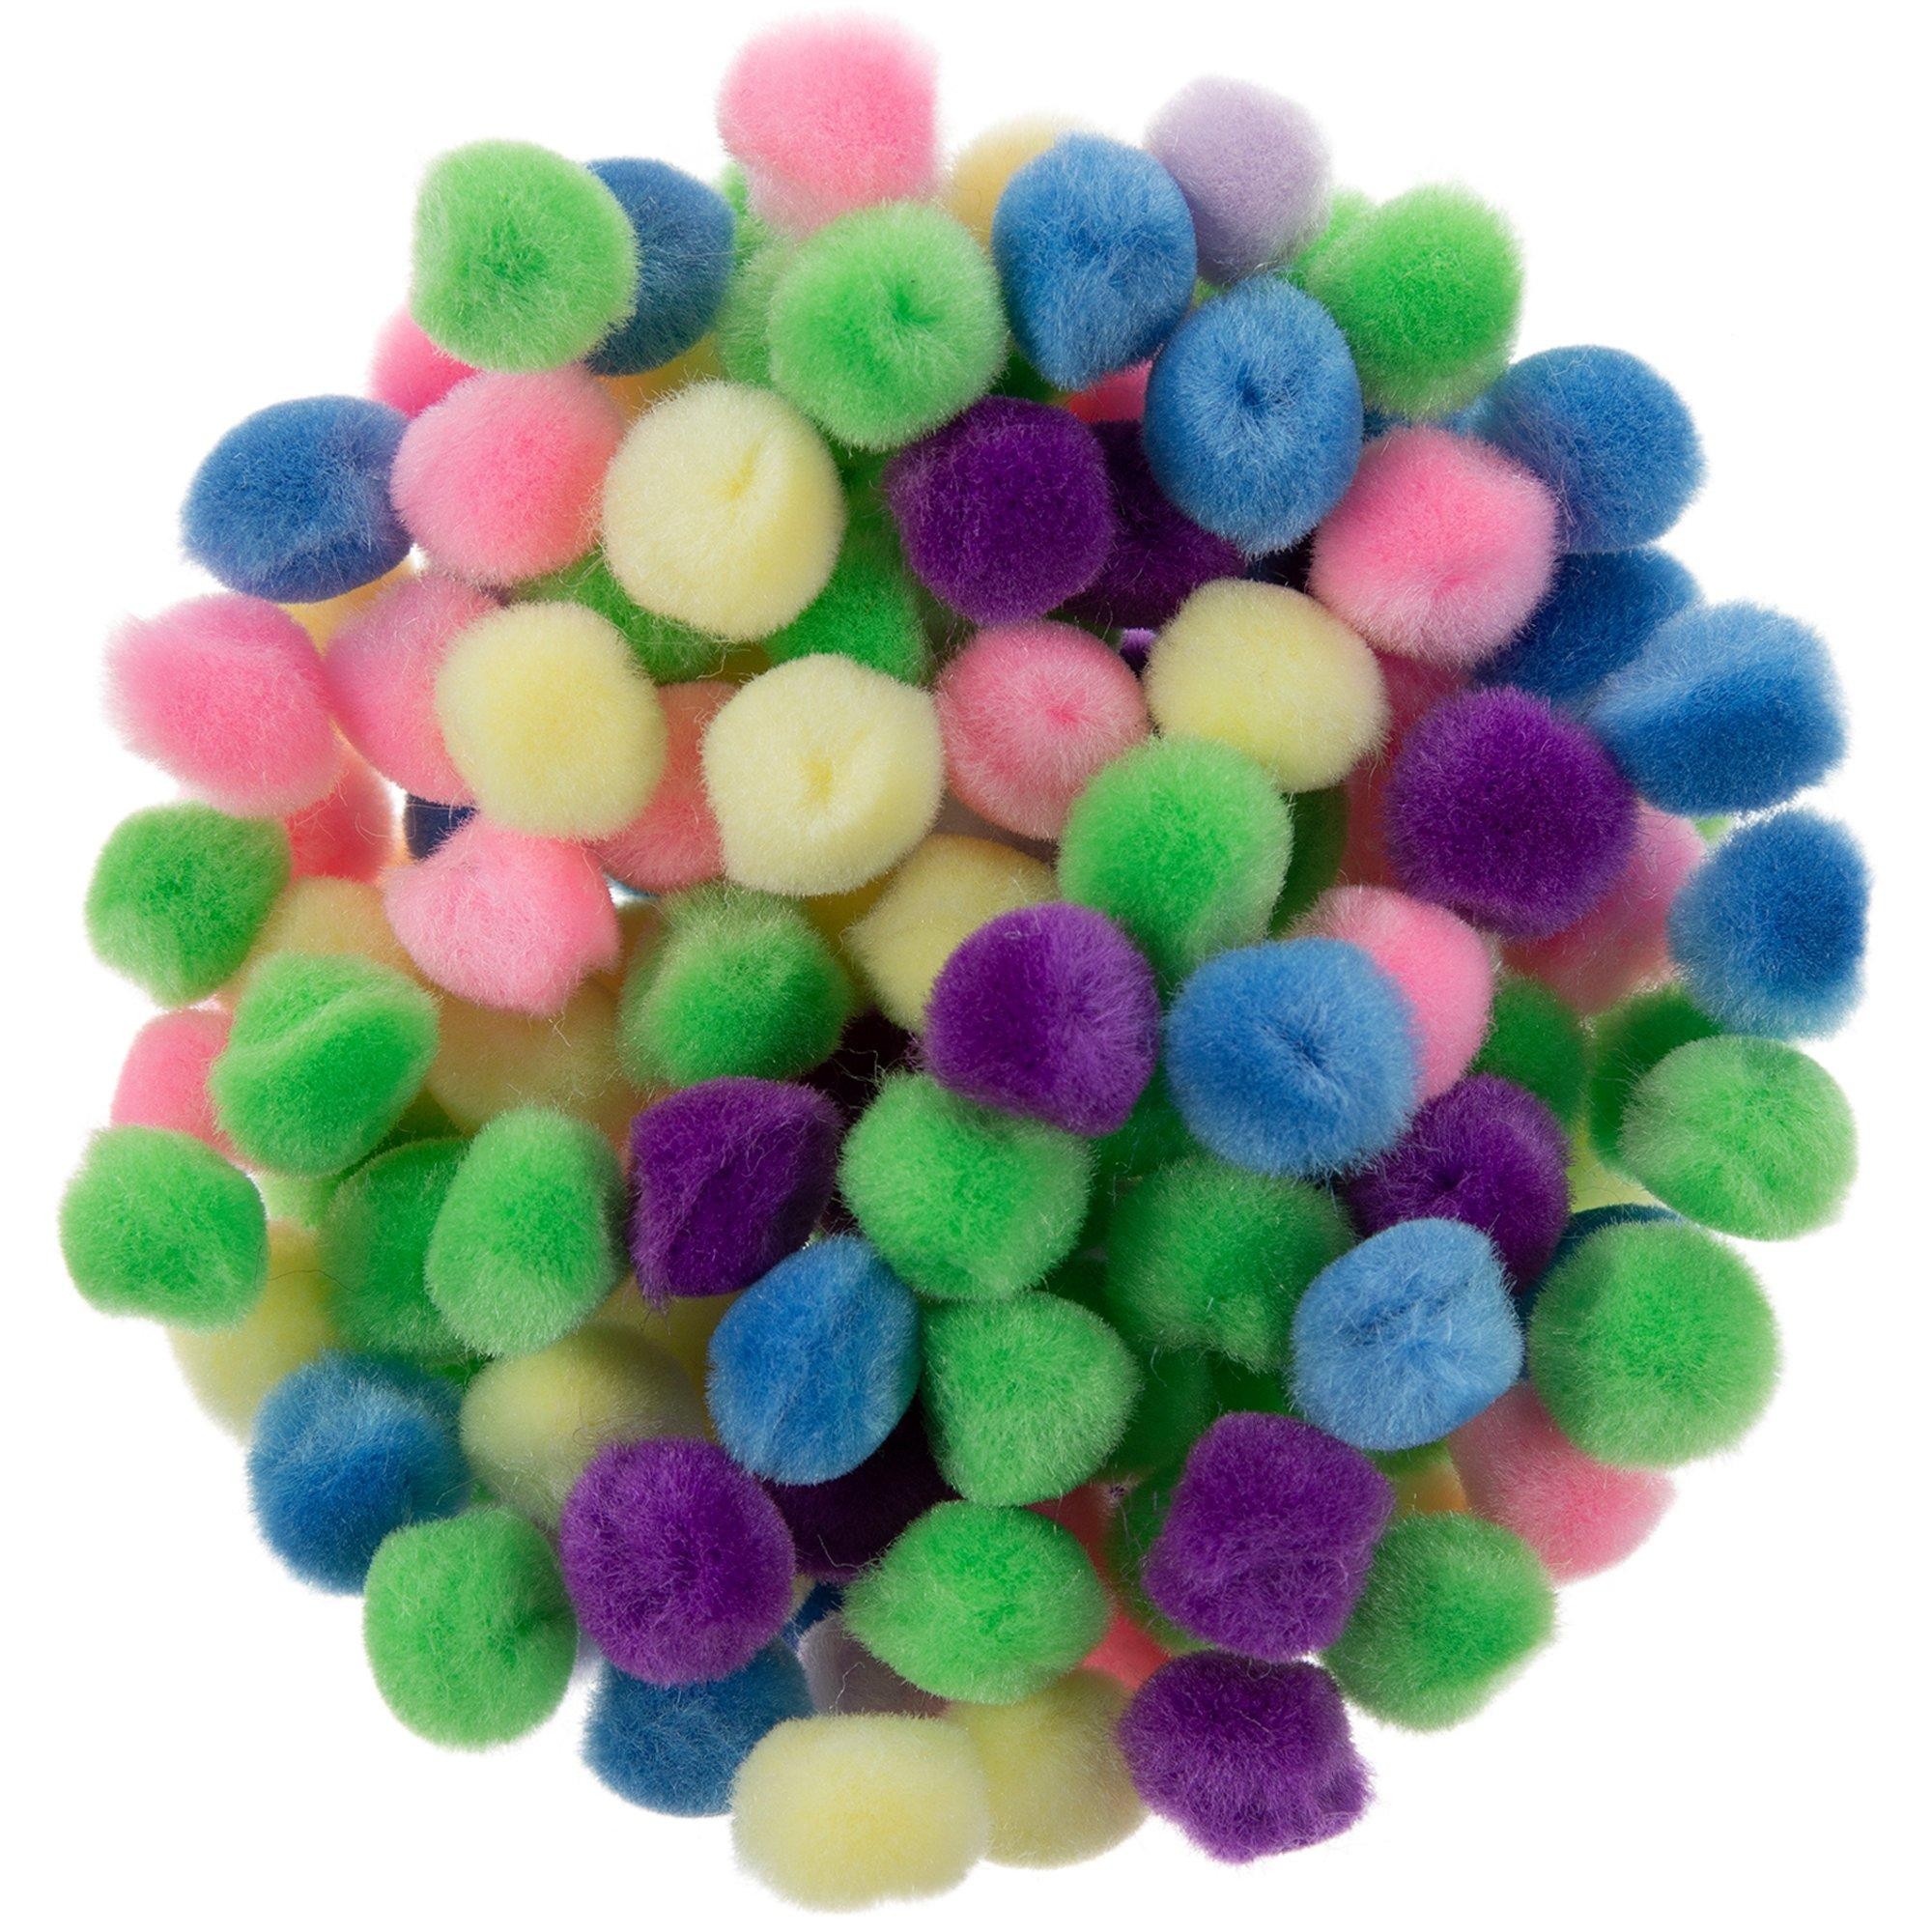 Adeweave 1000 Assorted Craft pom poms Multicolor Bulk pom poms Arts and Crafts  Pompoms for Crafts in Assorted Size- Soft and Fluffy Puff Balls Large  Colored Cotton Balls for Home and School